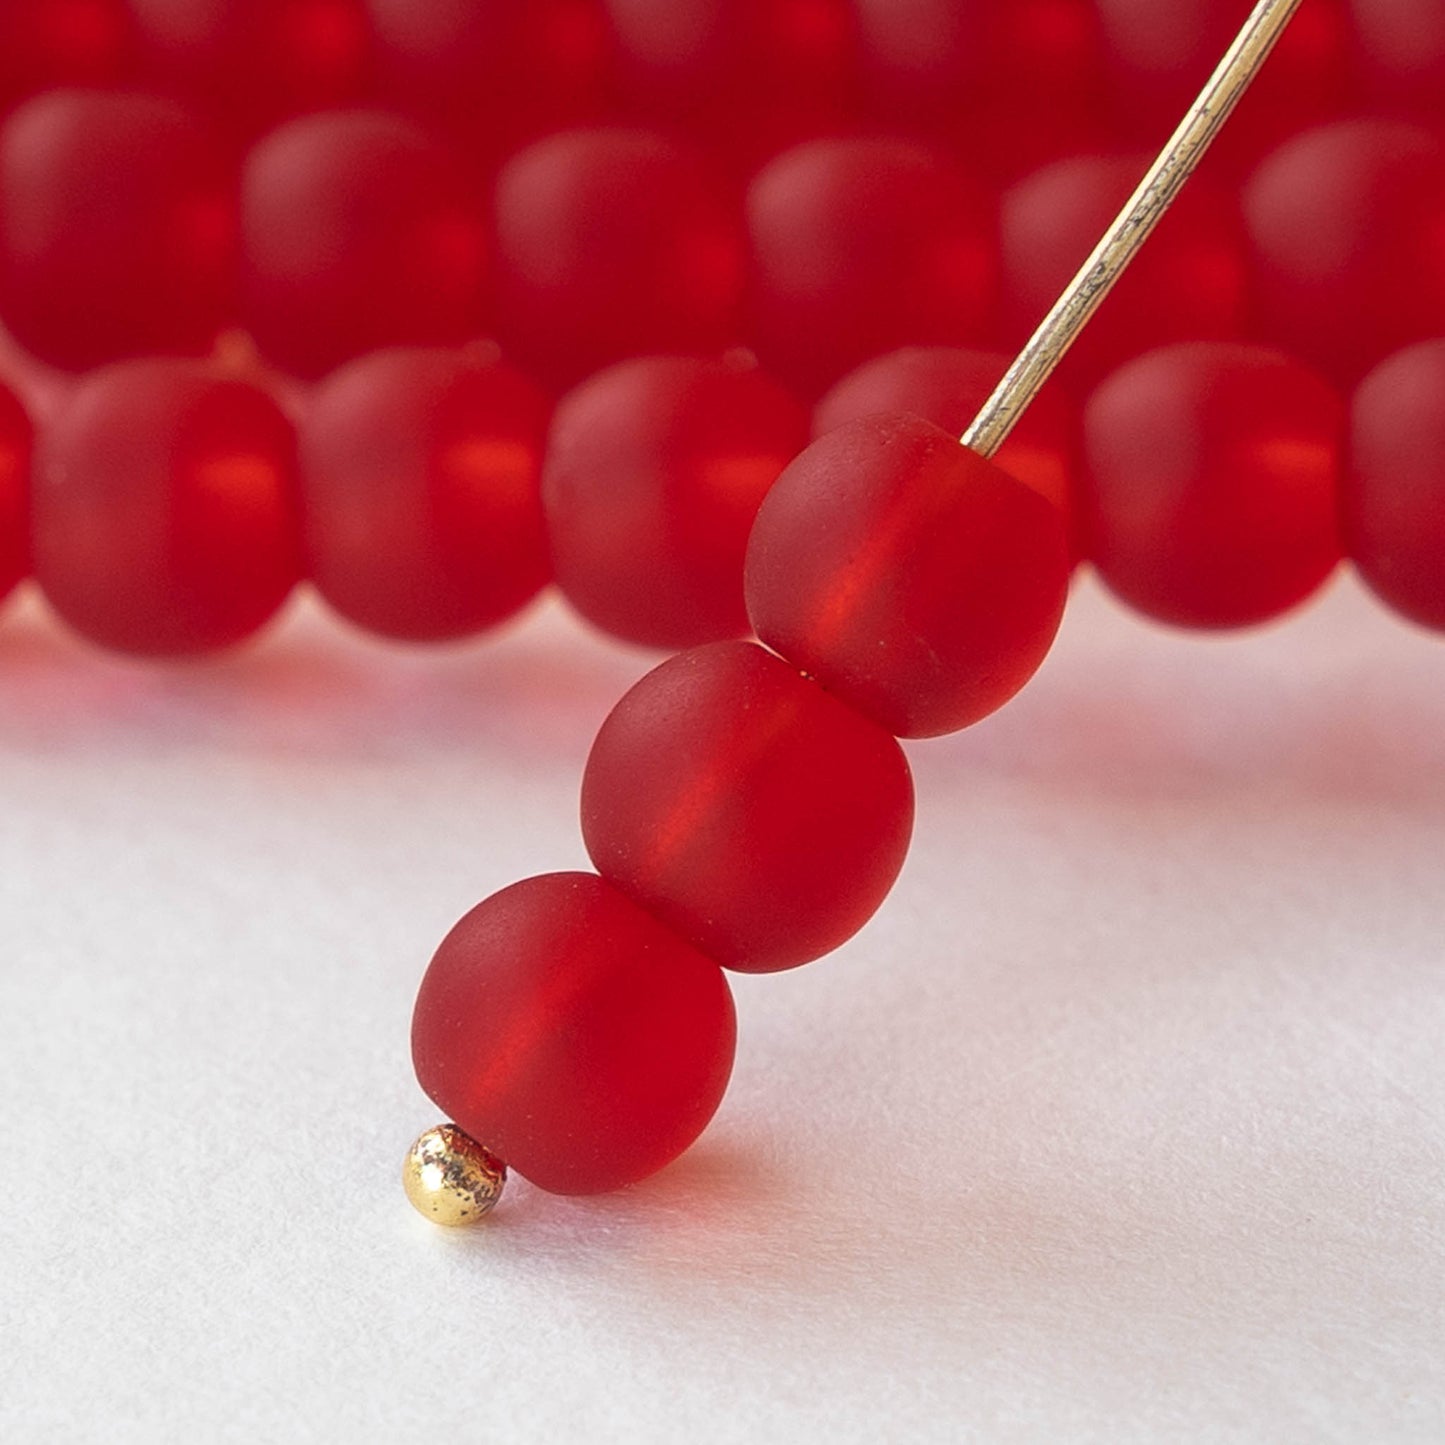 Load image into Gallery viewer, 6mm Frosted Glass Round Beads - Red - 16 Inches
